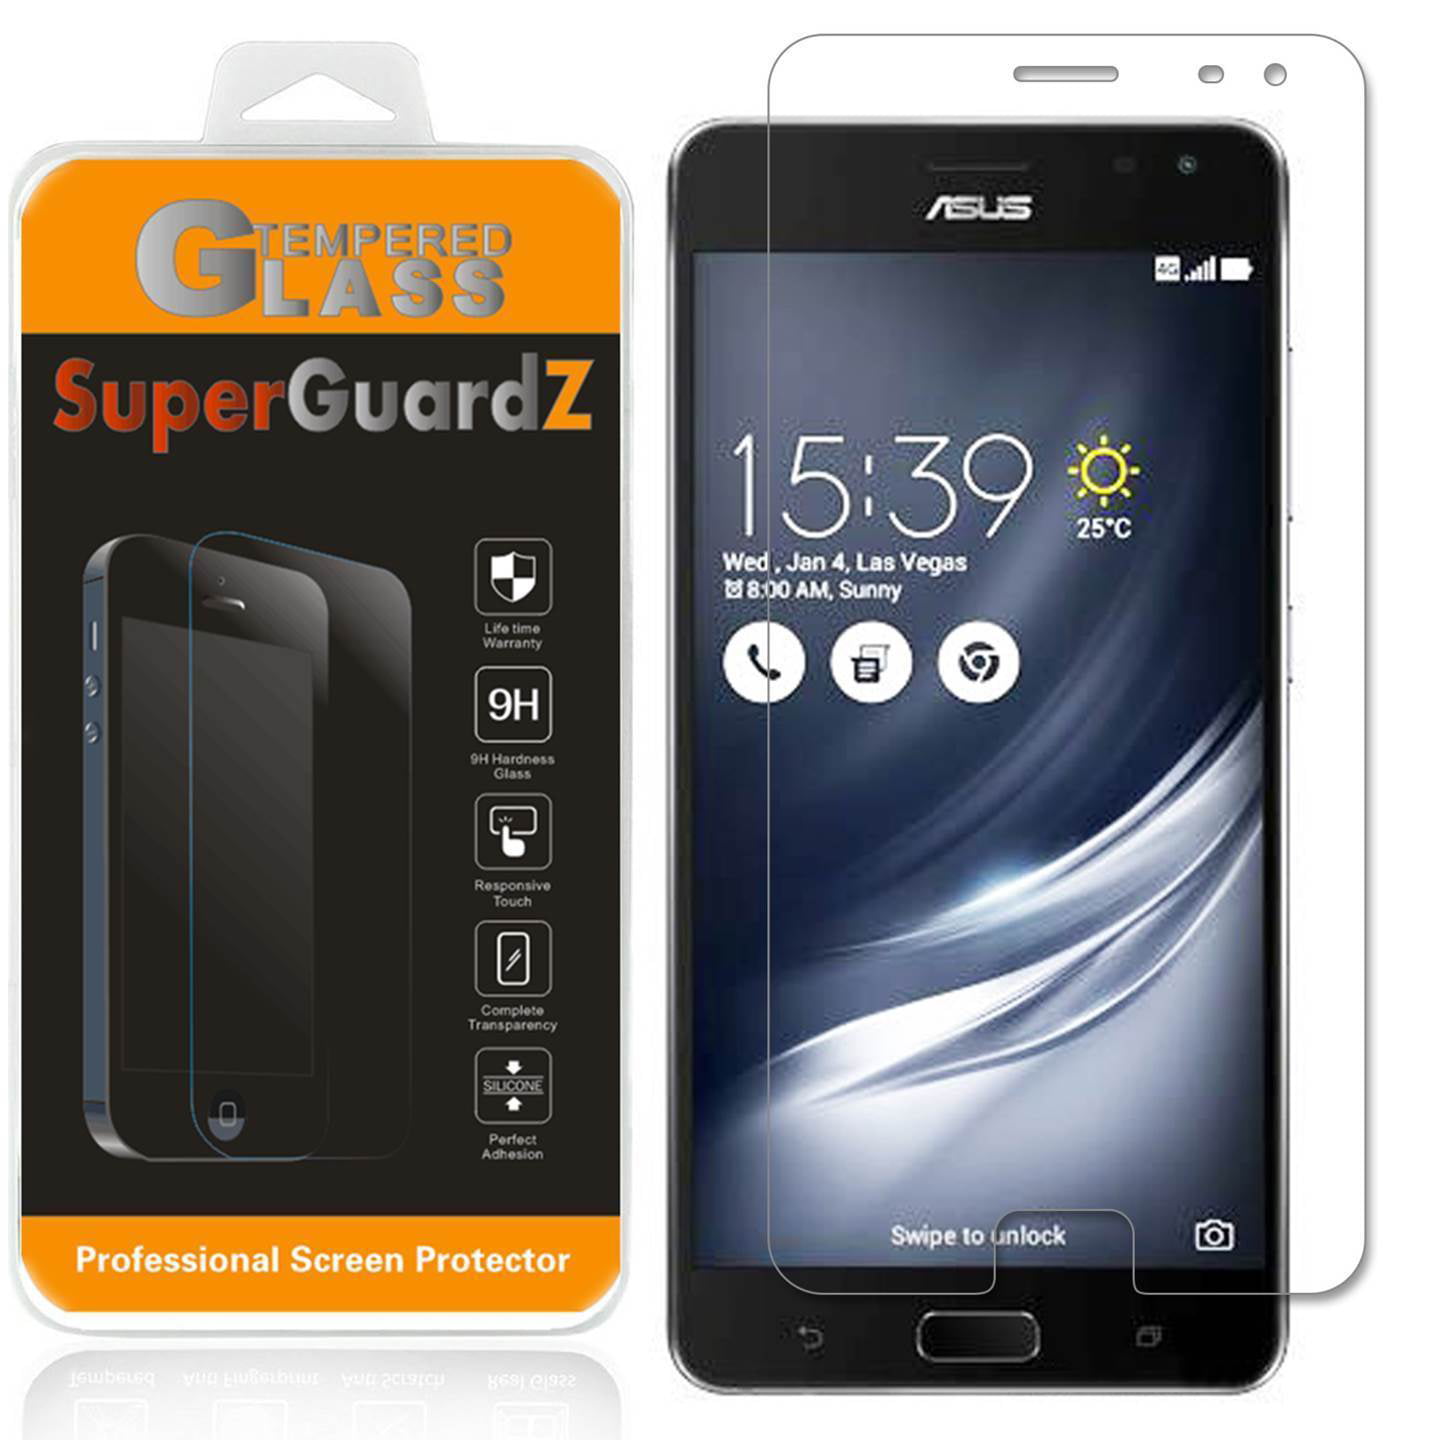 [2-Pack] For ASUS Zenfone AR - SuperGuardZ Tempered Glass Screen Protector [Anti-Scratch, Anti-Bubble] + 4-in-1 LED Stylus Pen